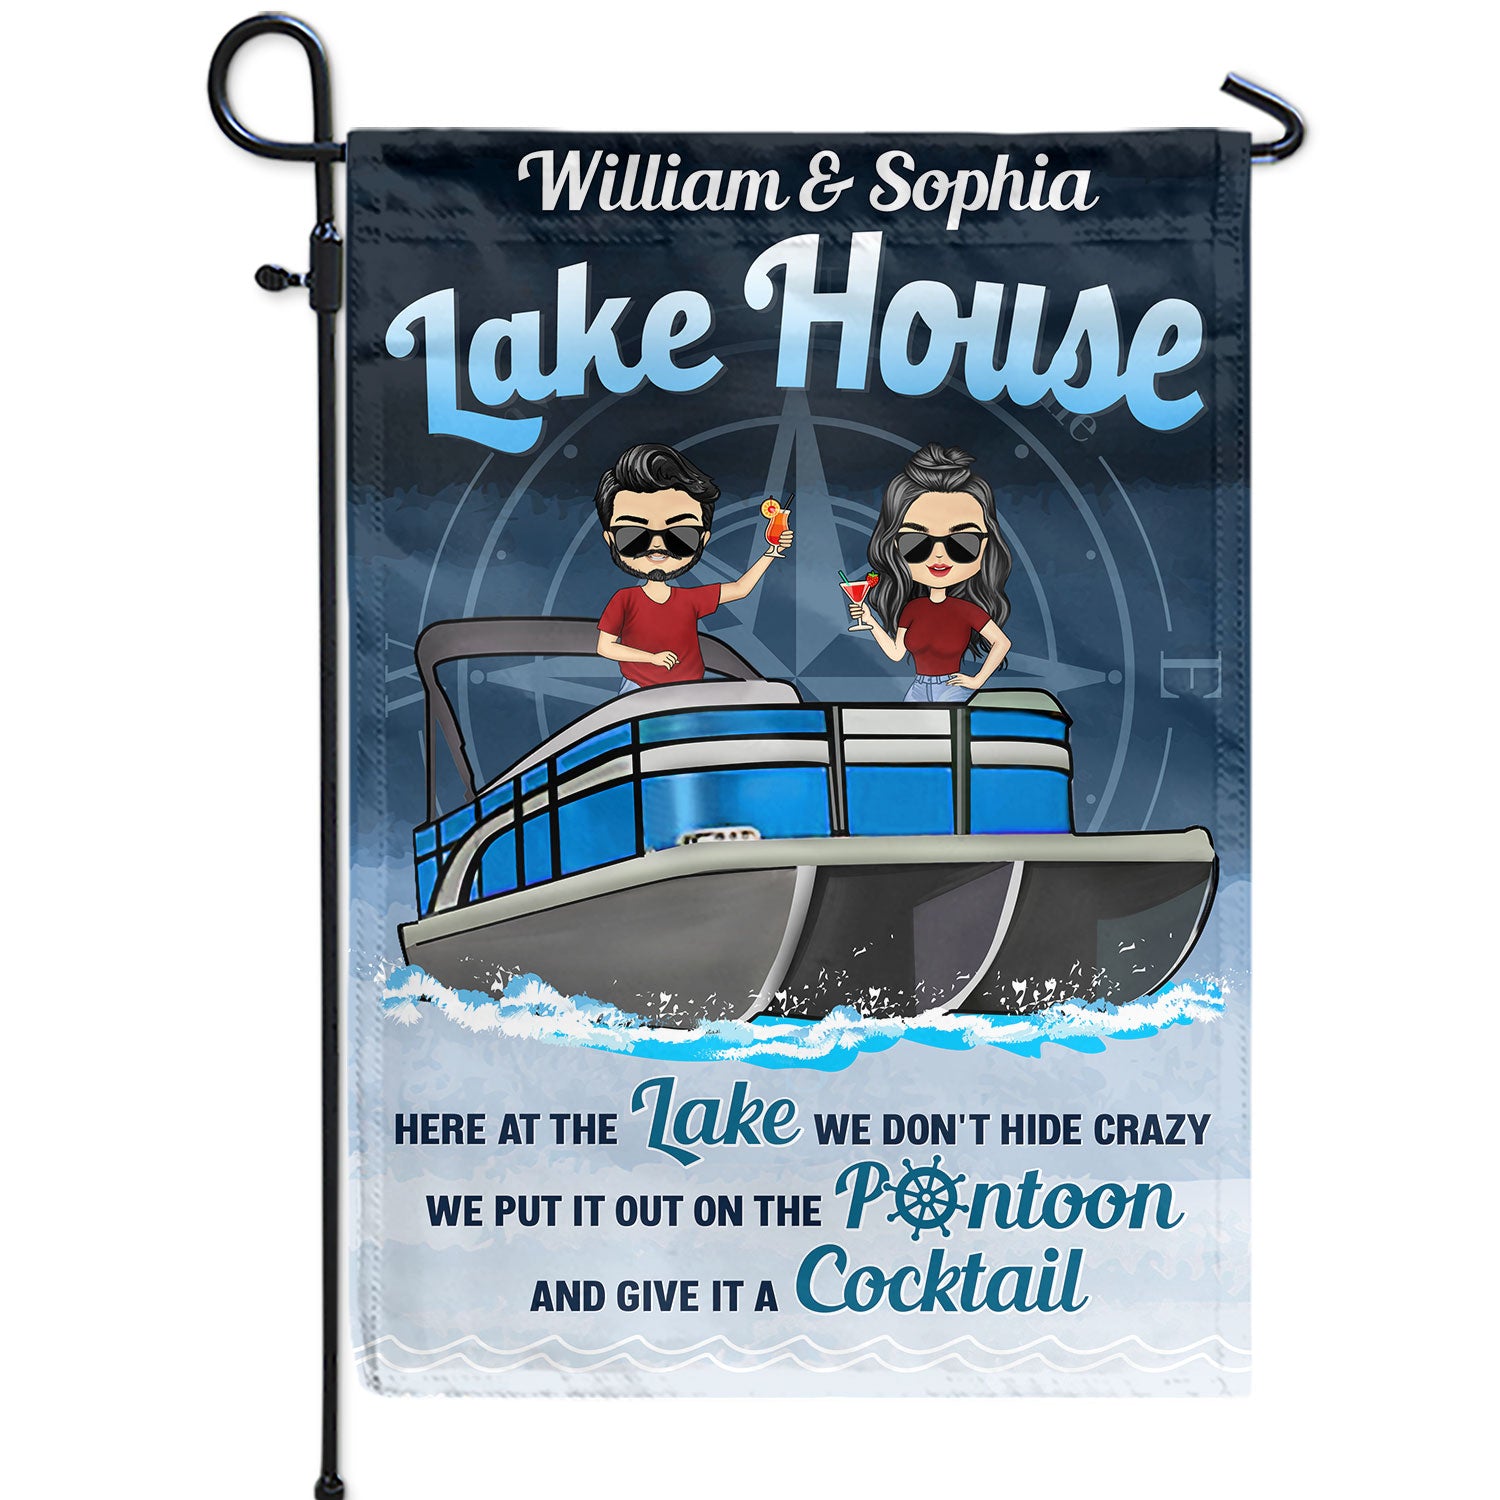 Pontoon Here At The Lake We Don't Hide Crazy - Home Decor, Backyard Decor, Lake House Decor, Gift For Pontooning Lovers, Couples, Husband, Wife - Personalized Custom Flag